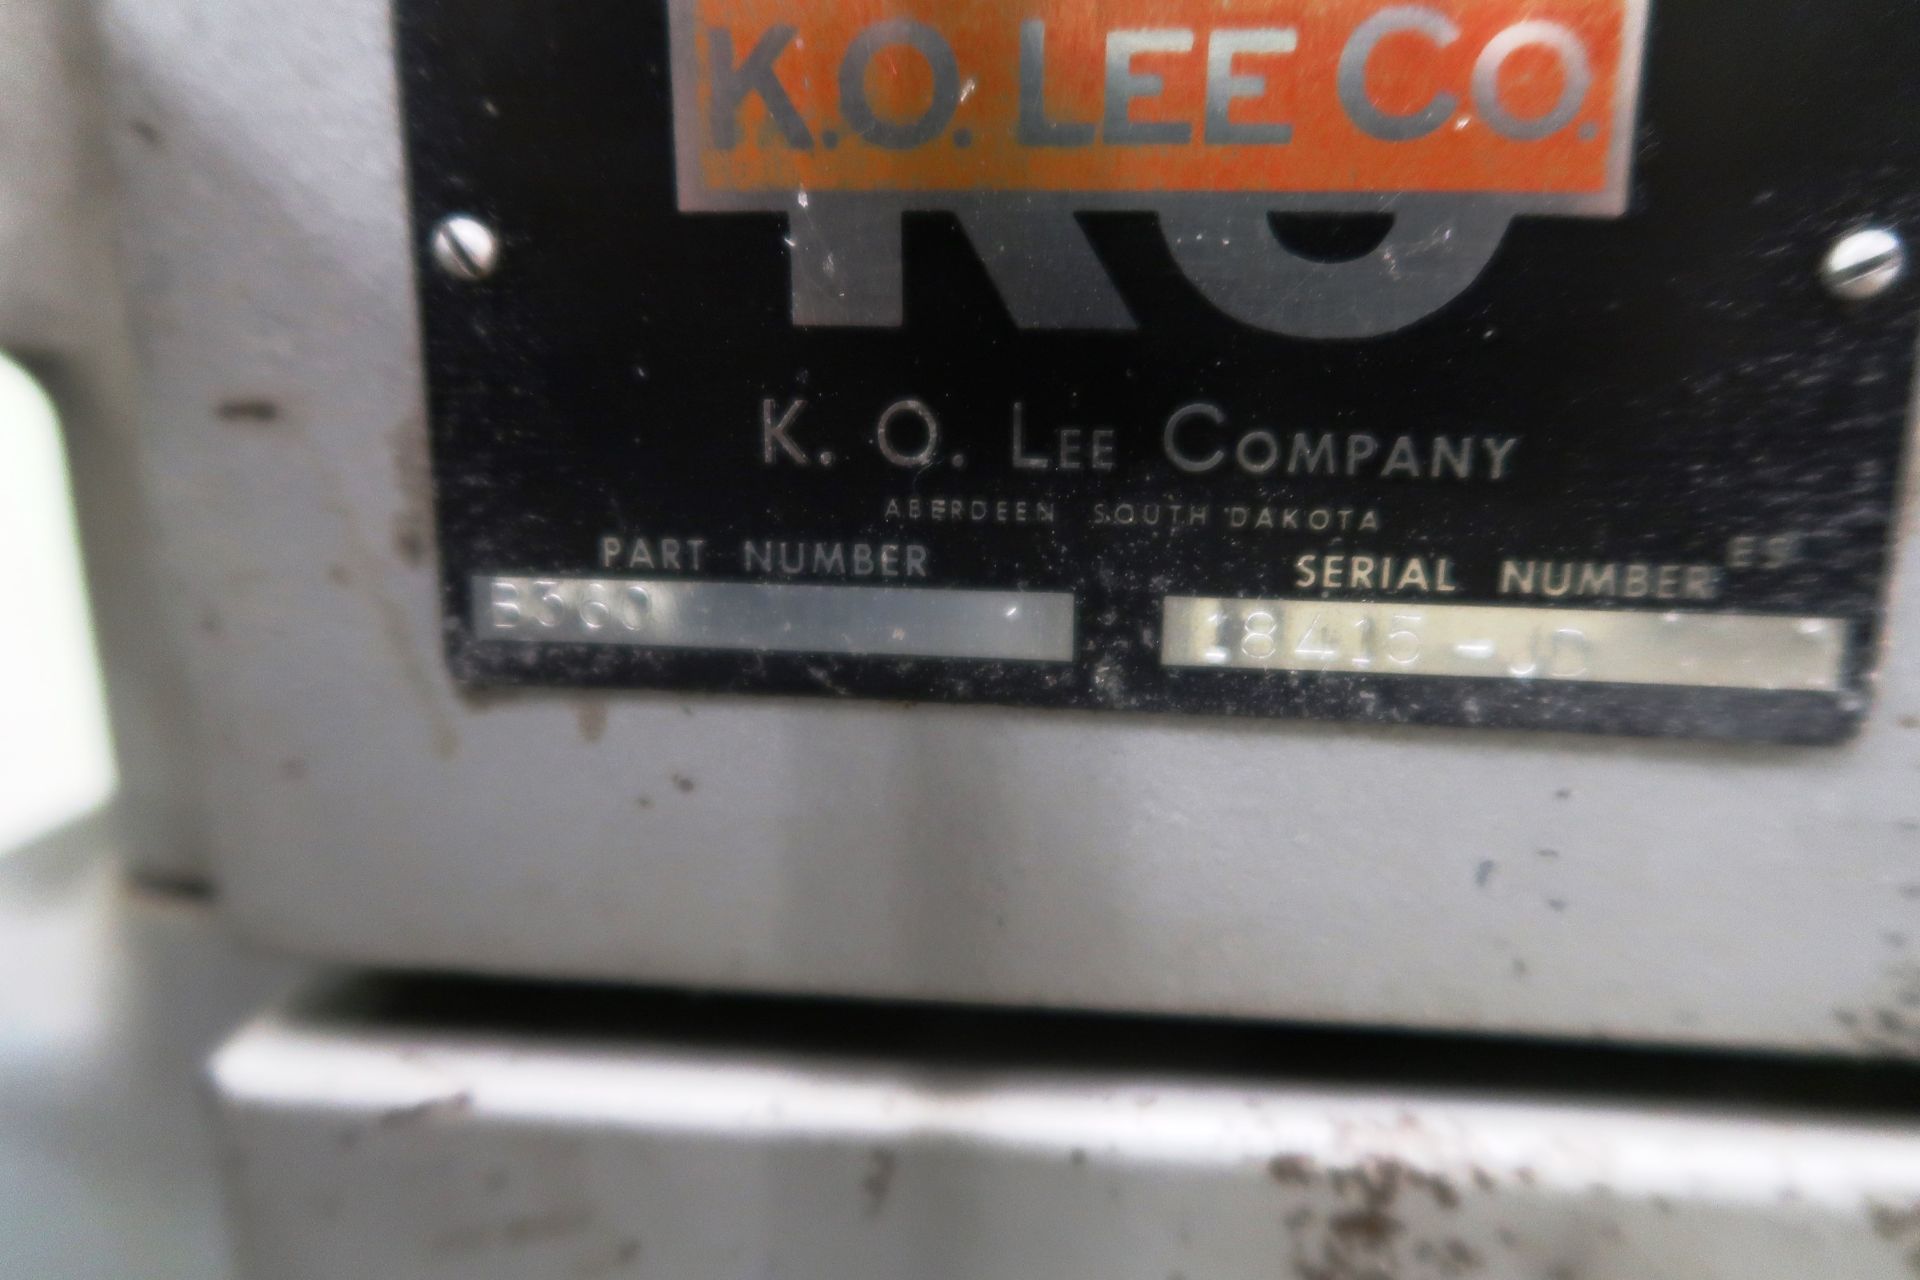 Ko Lee Model B360 Tool And Cutter Grinder With Motorized Work Head - Image 3 of 3